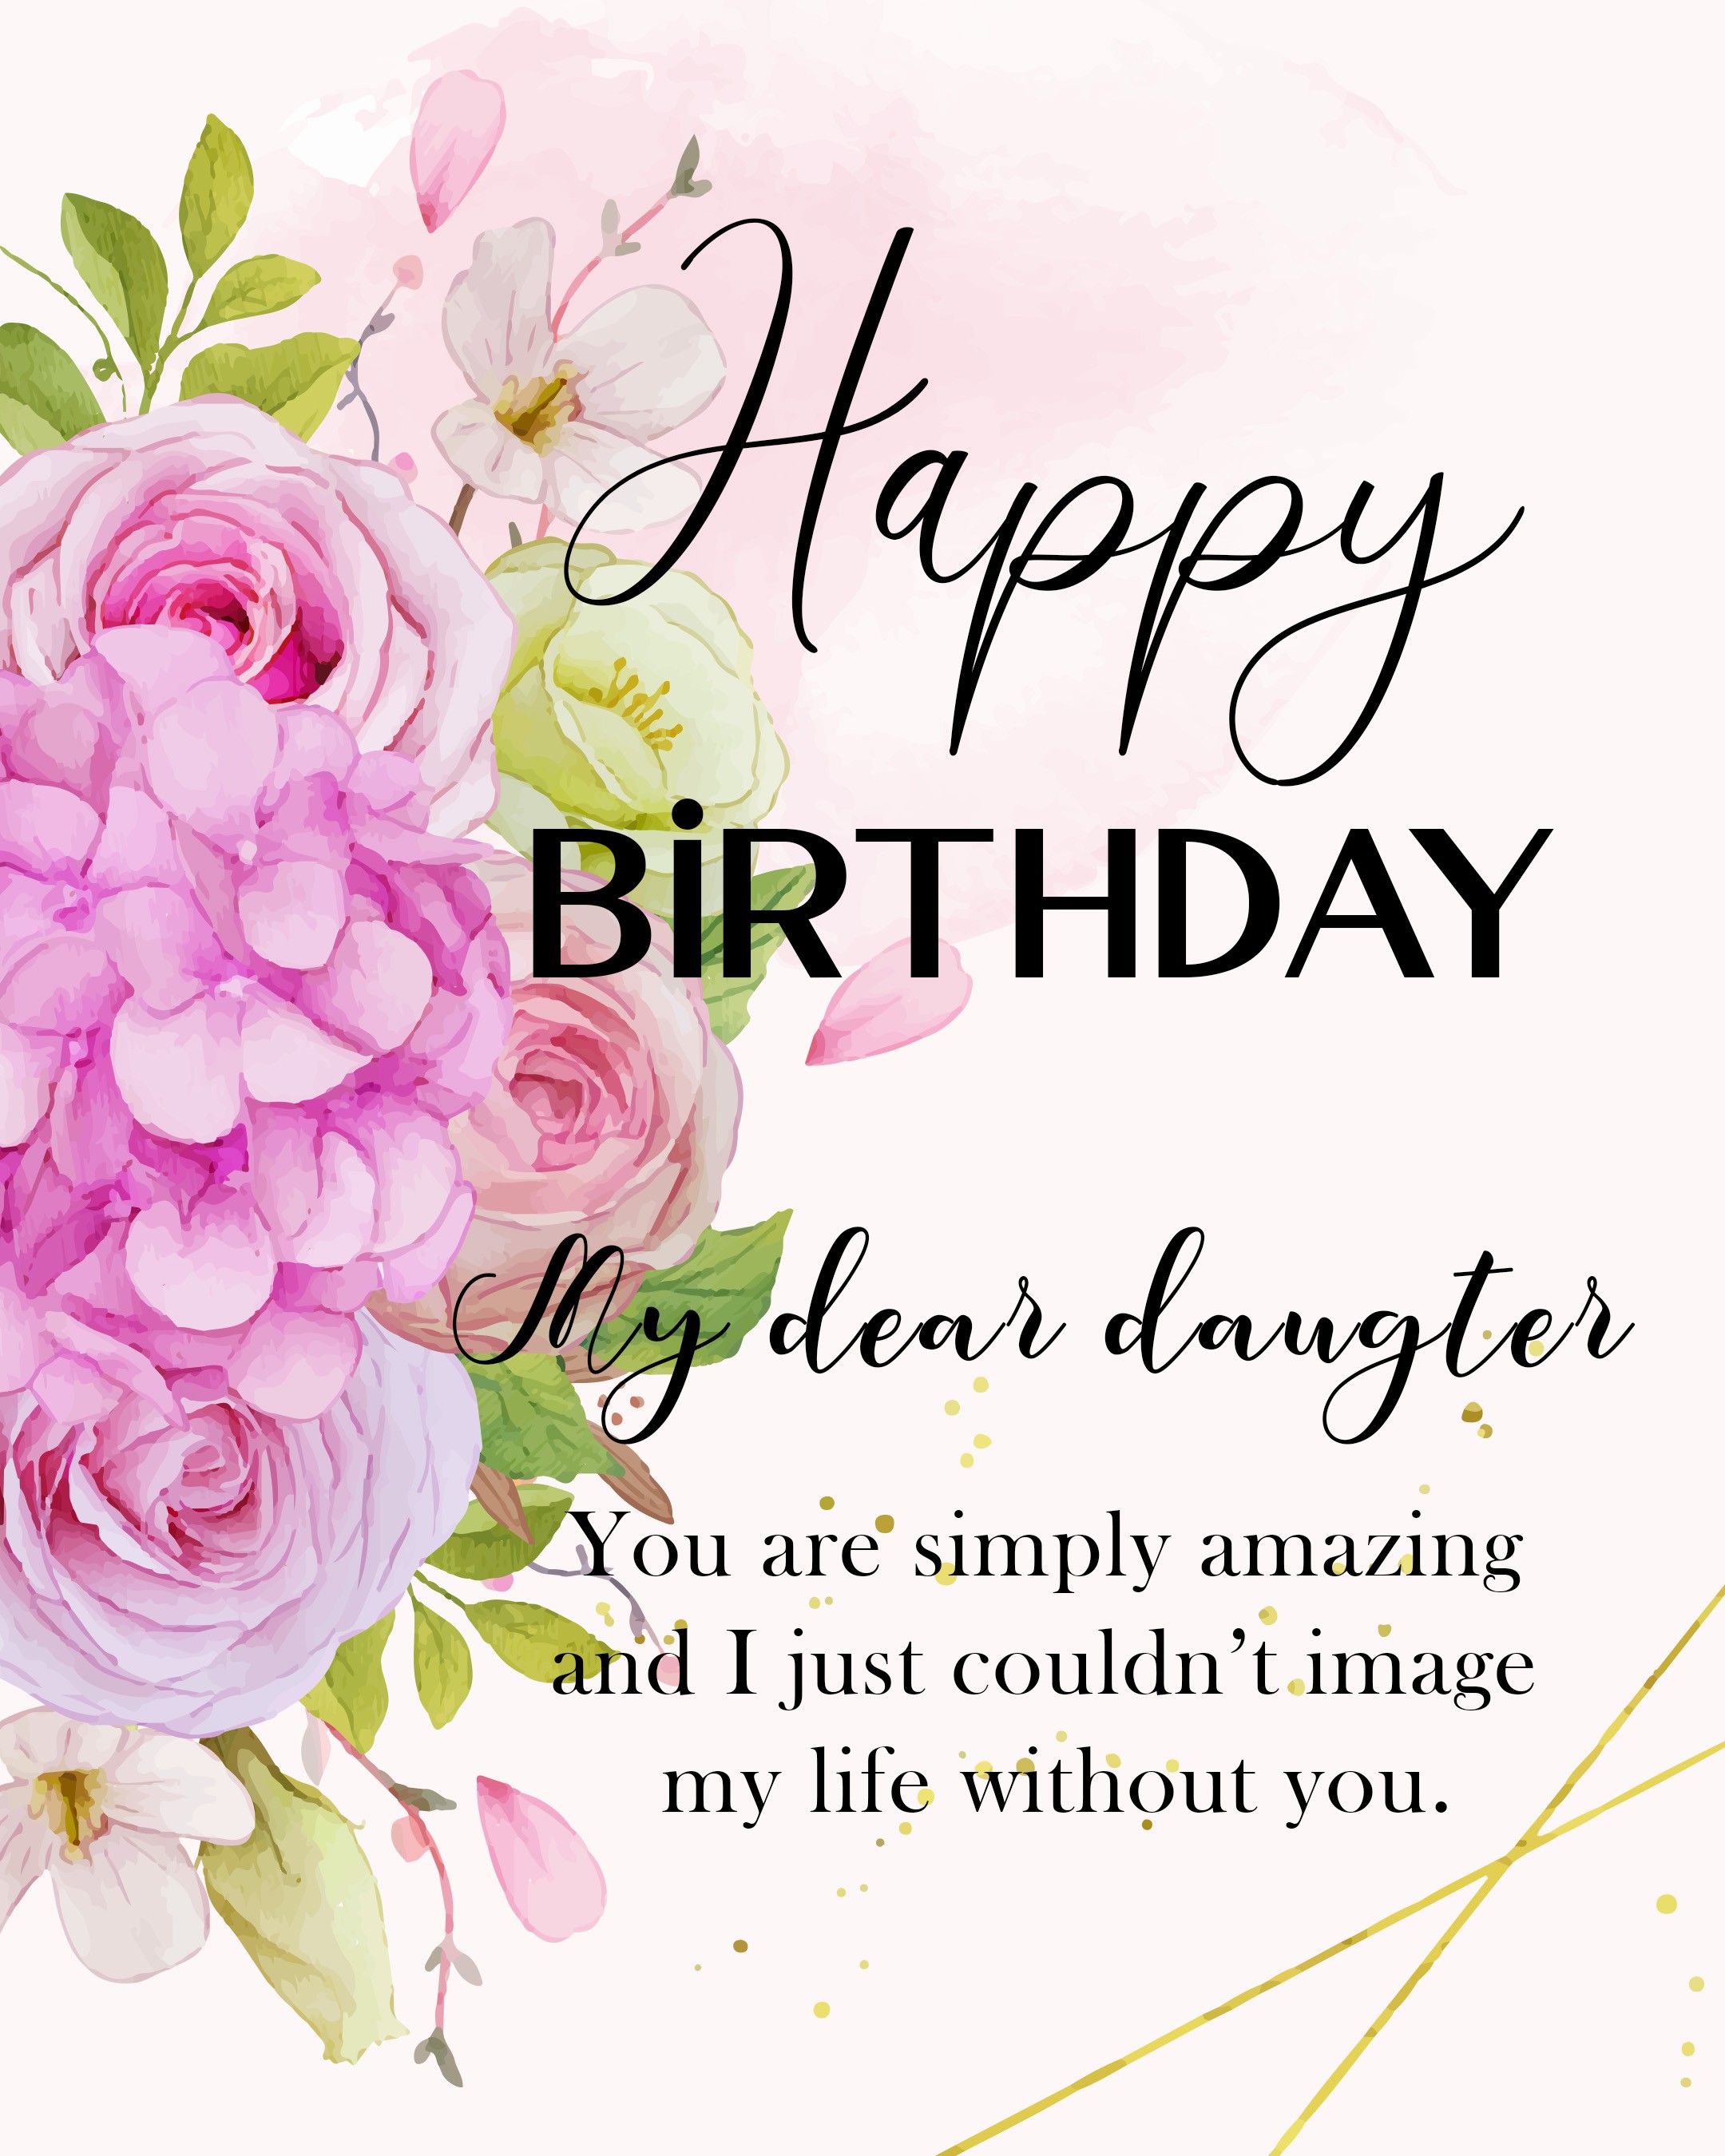 Free Happy Birthday Image For Daughter With Flowers - birthdayimg.com